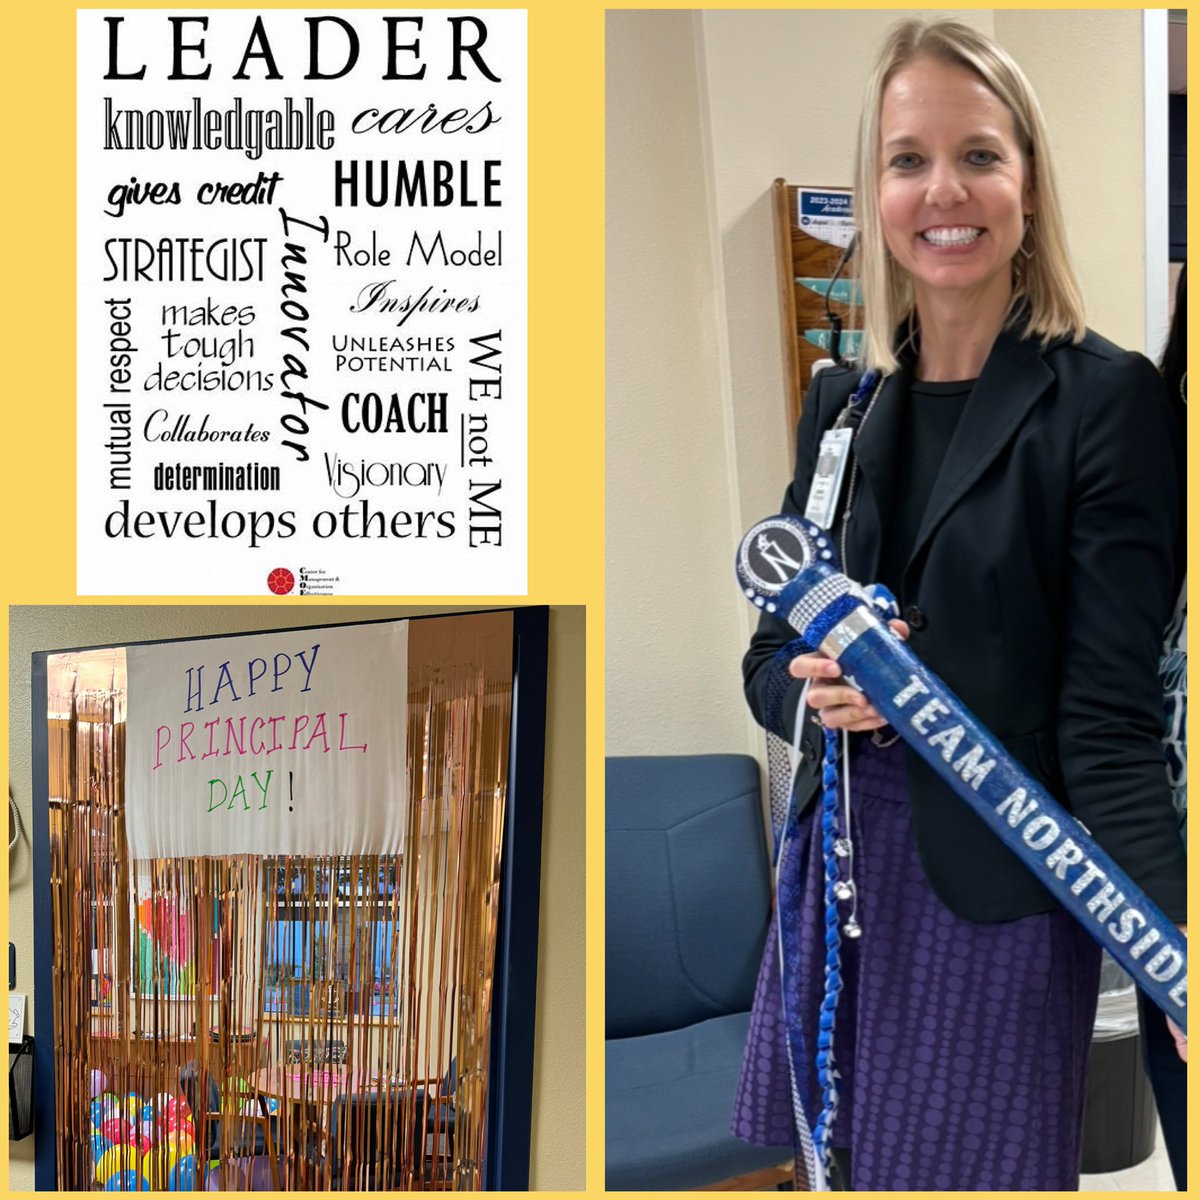 Happy Principal’s Day! @NISDMurnin is lucky to have such a great leader! ⚓️@ambermfreeman #nisdprincipalsday